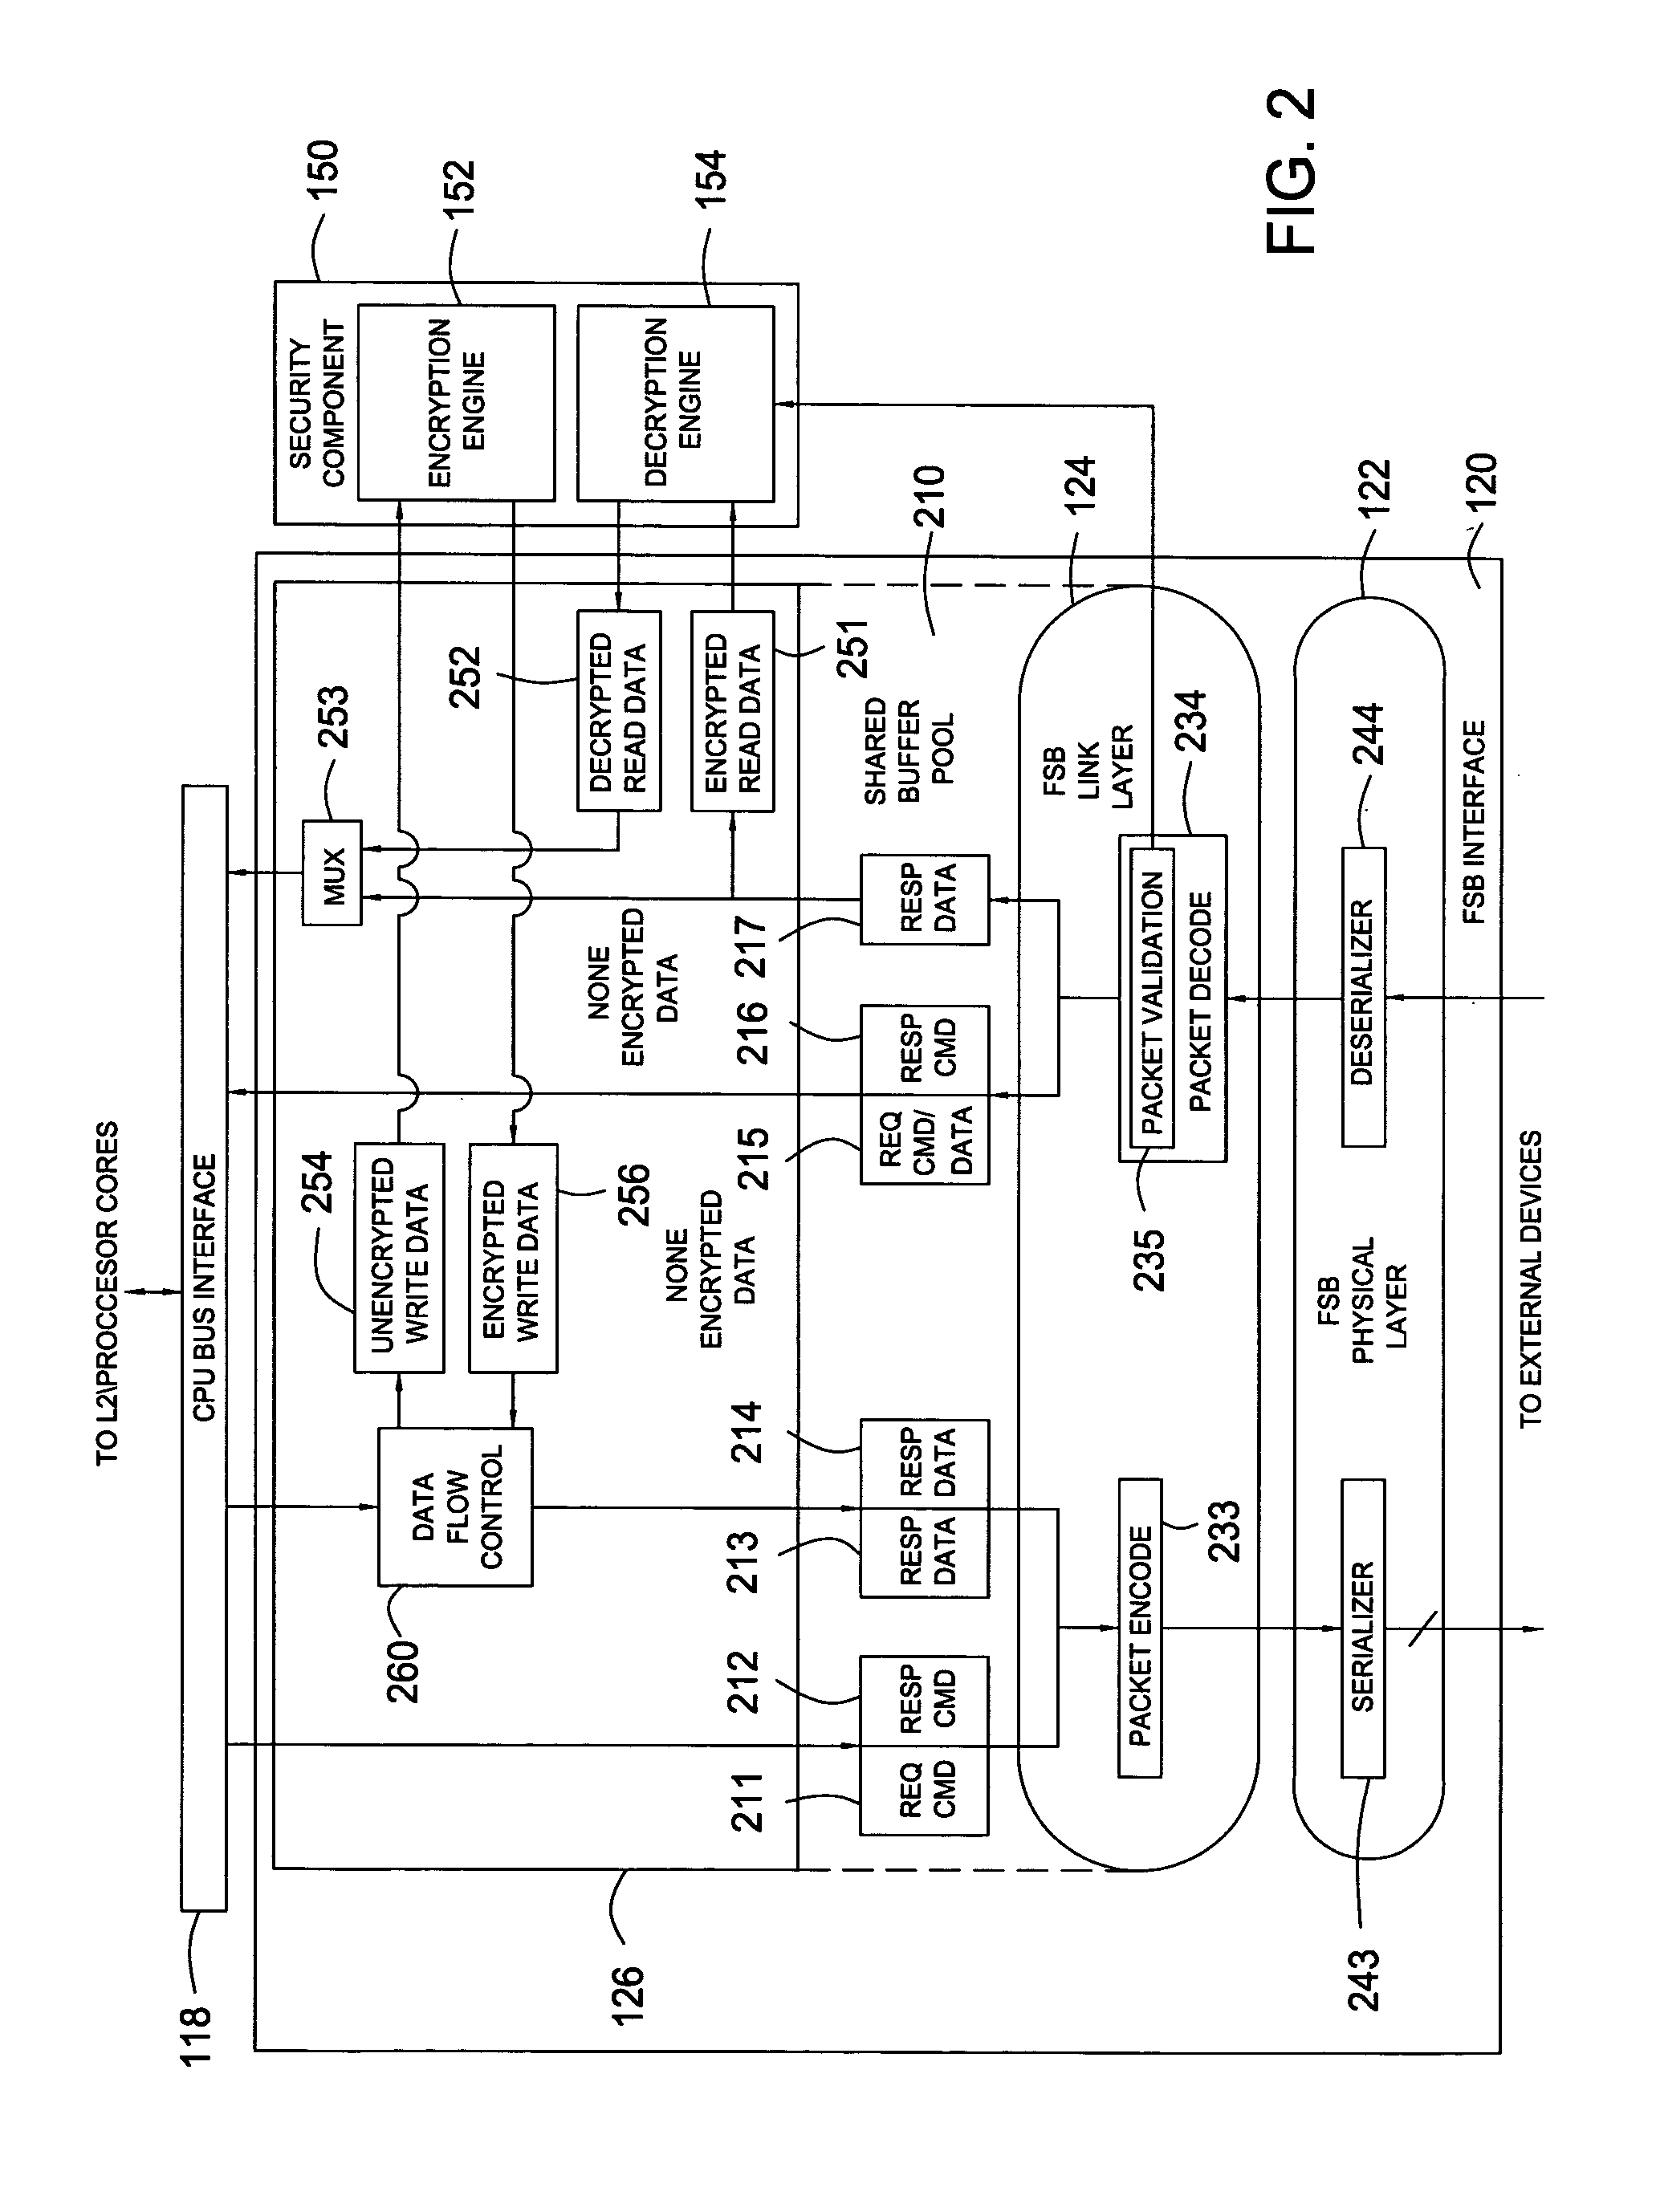 Data encryption interface for reducing encrypt latency impact on standard traffic